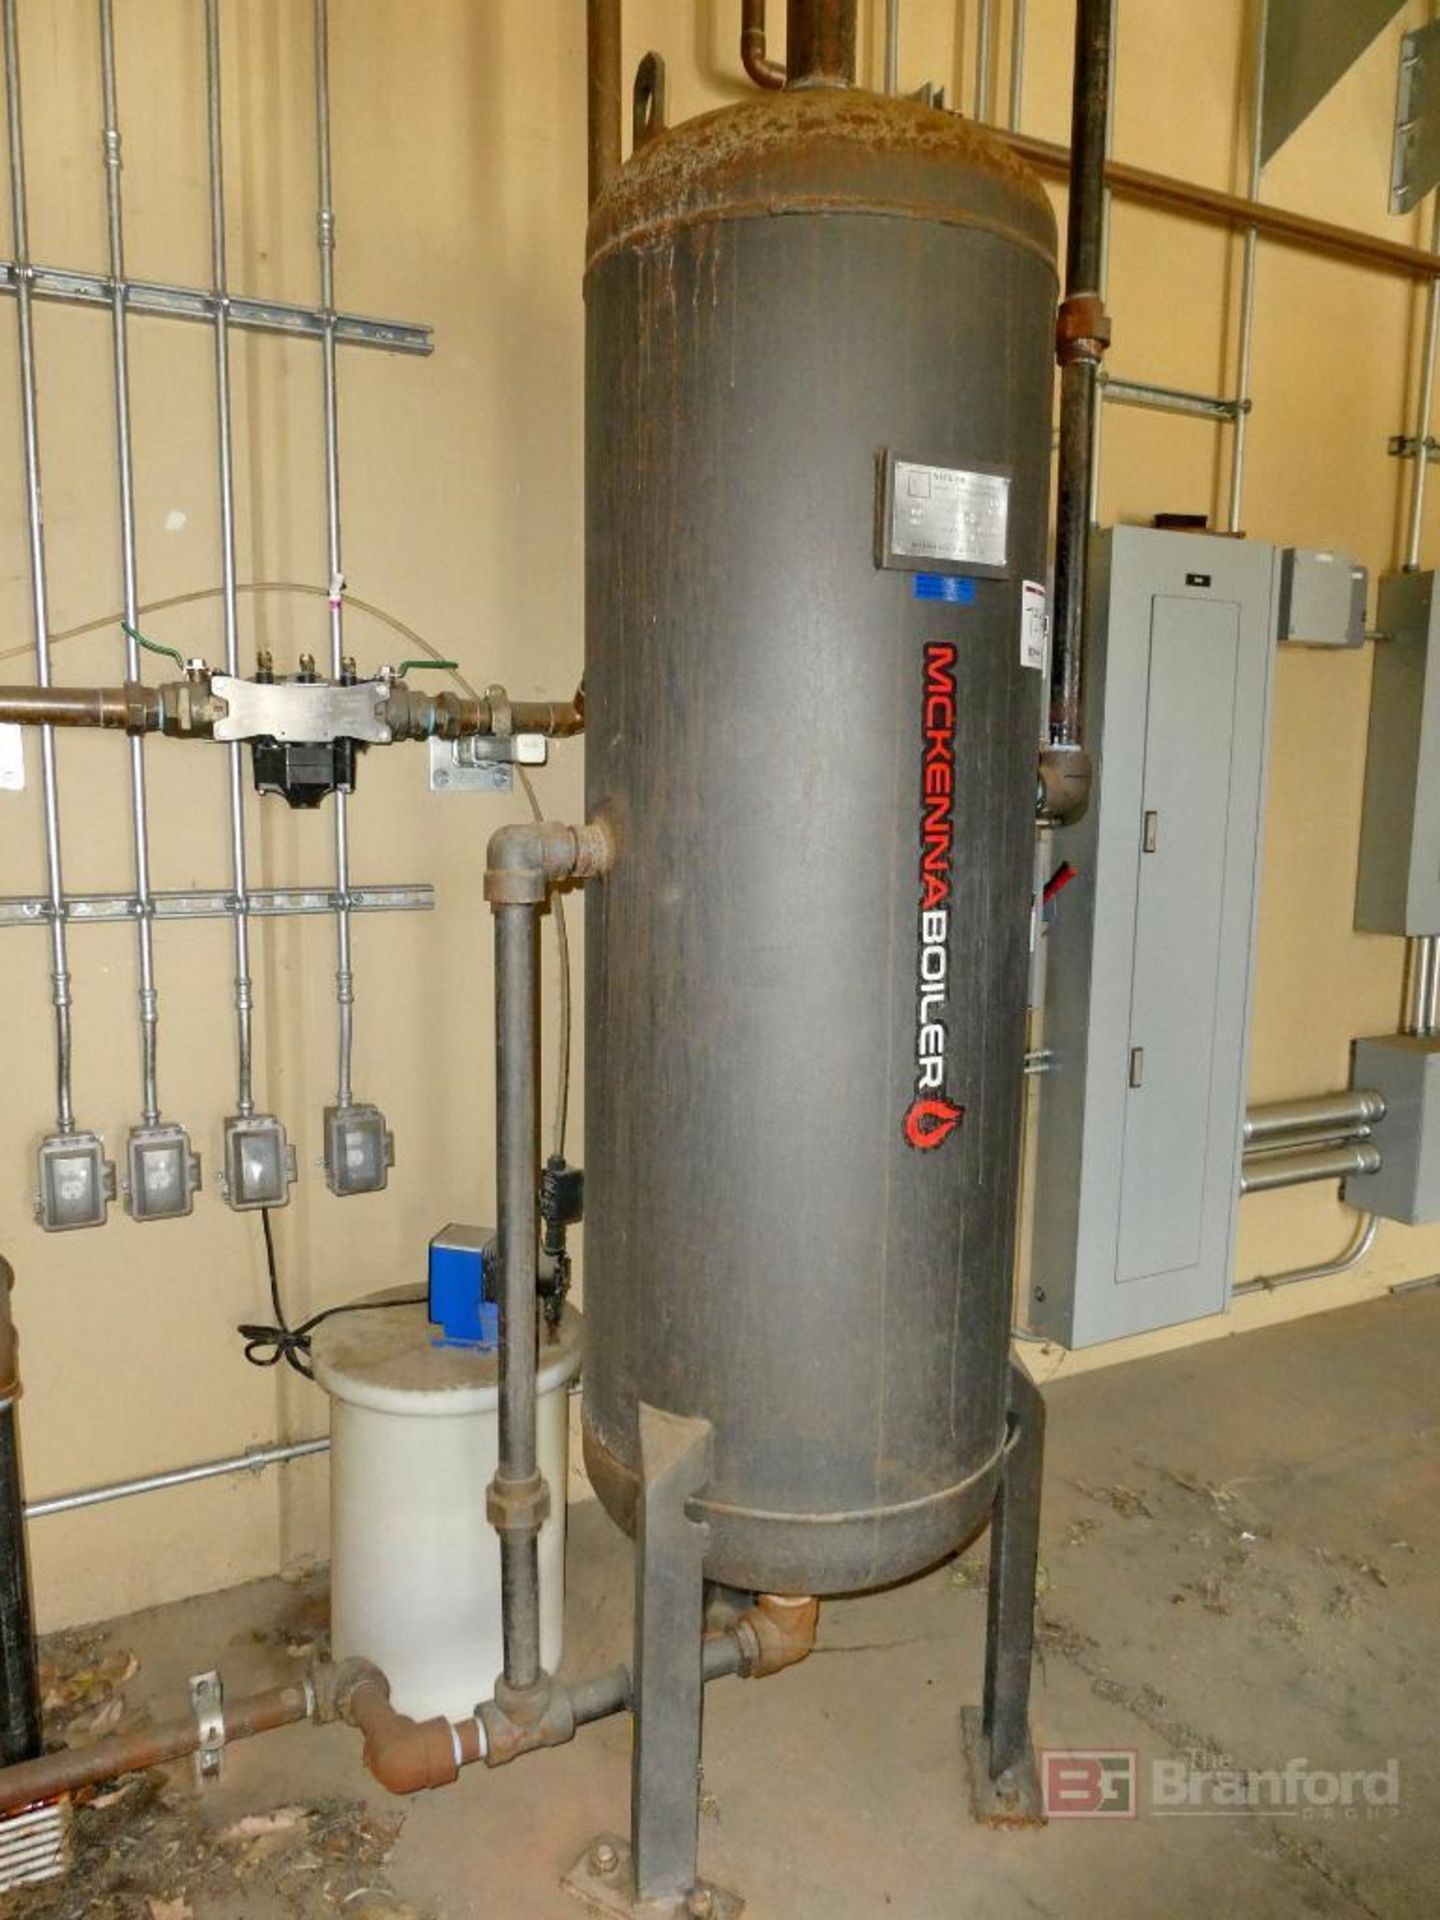 McKenna Boilers Support Holding Tanks for the Steam Boilers - Image 2 of 8